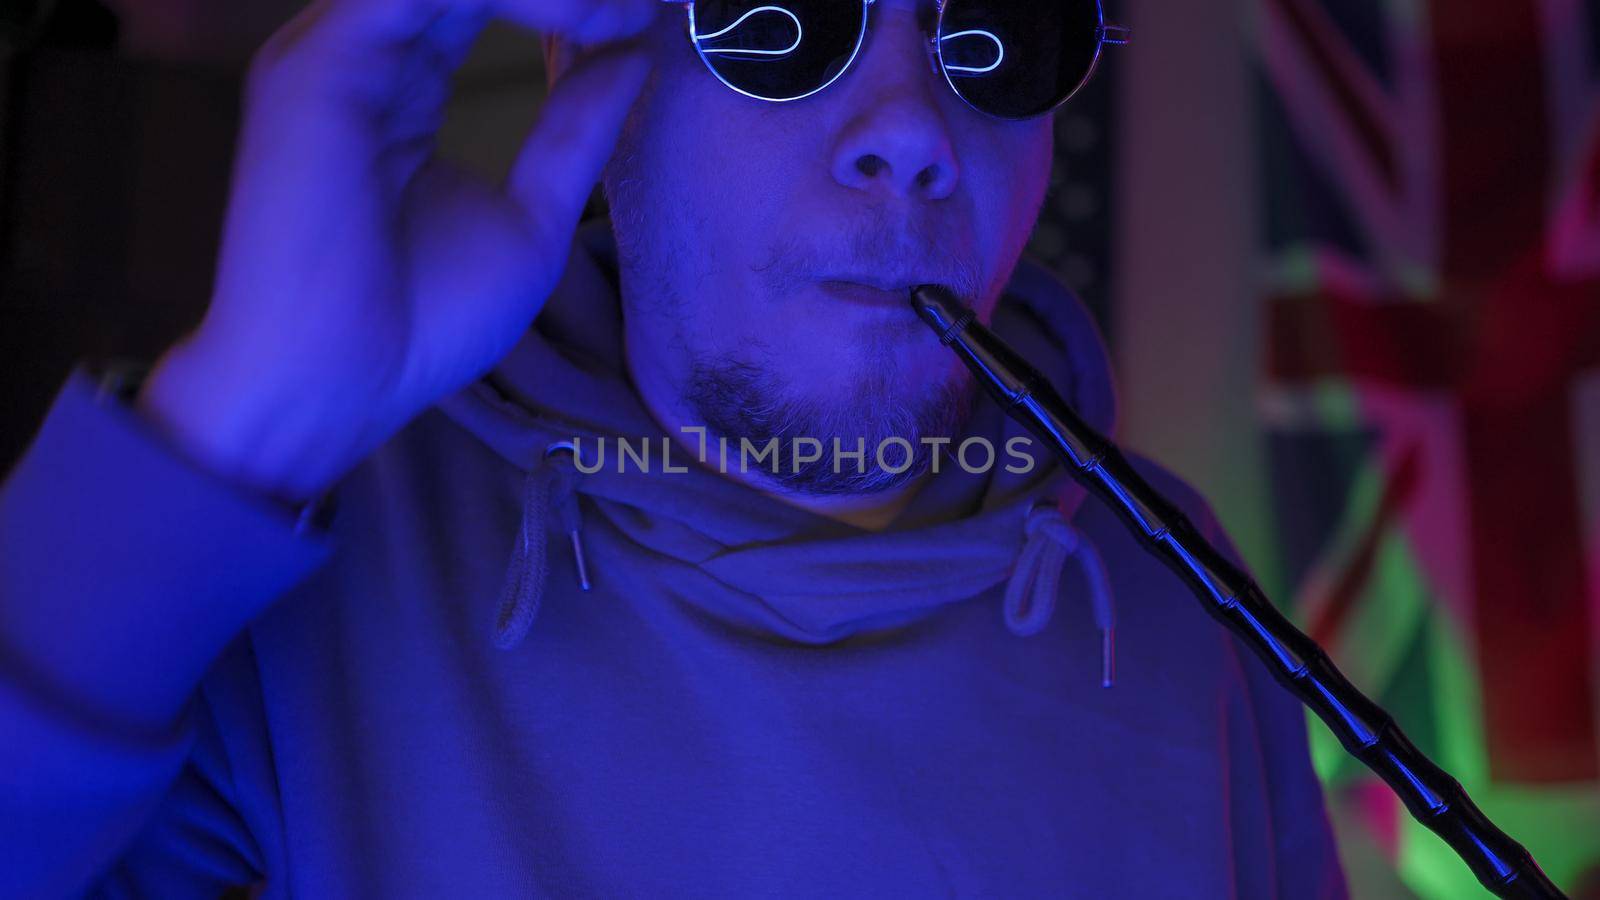 Hipsters Smoking Hookah Having Fun Self-Isolation Time At Home In Neon Backlight, British Man In Sweatshirt Corrects Sunglasses Looking At Camera Against The Background Of Great Britain Flag